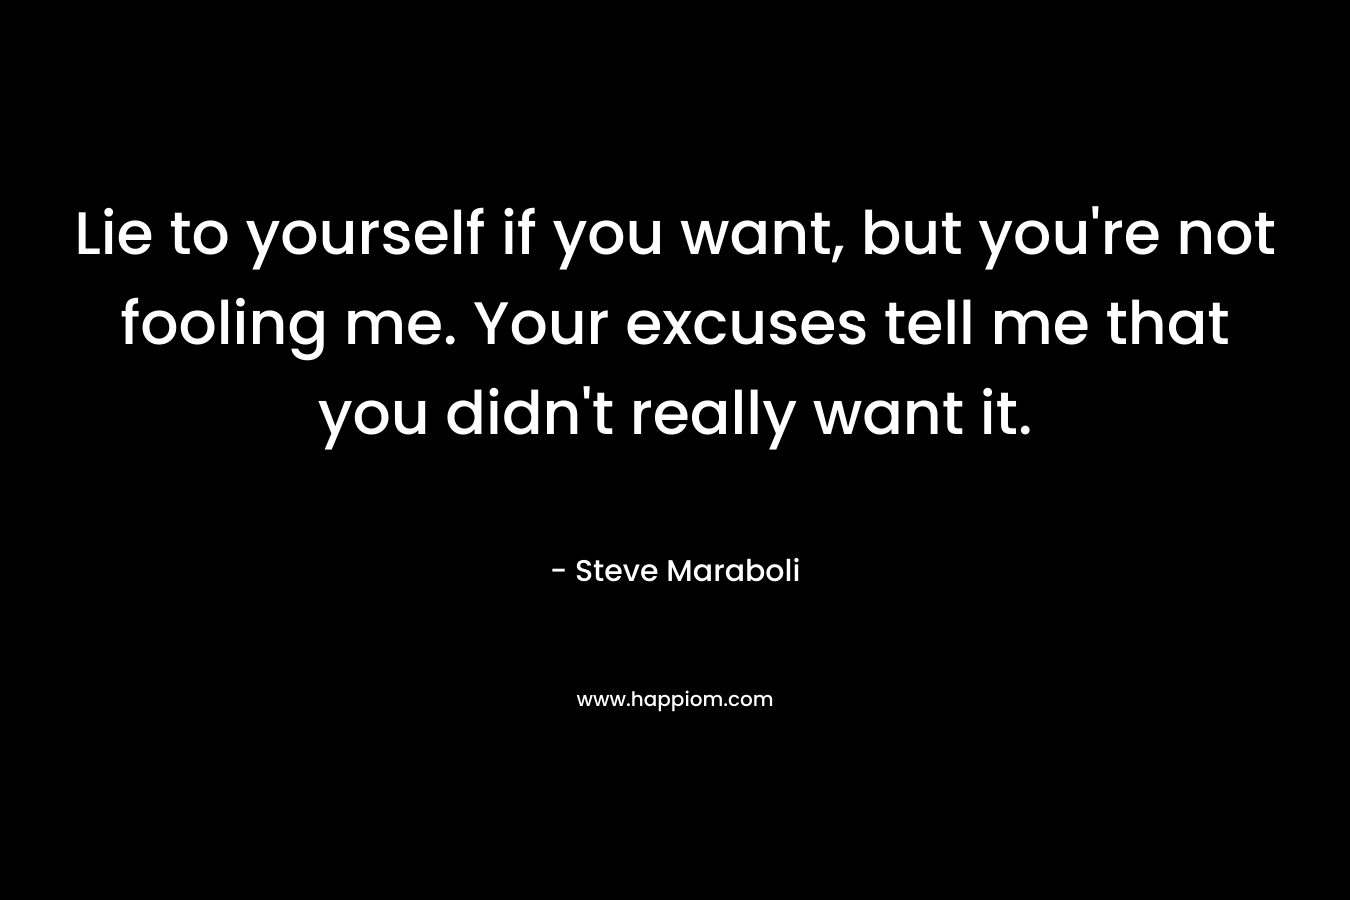 Lie to yourself if you want, but you’re not fooling me. Your excuses tell me that you didn’t really want it. – Steve Maraboli